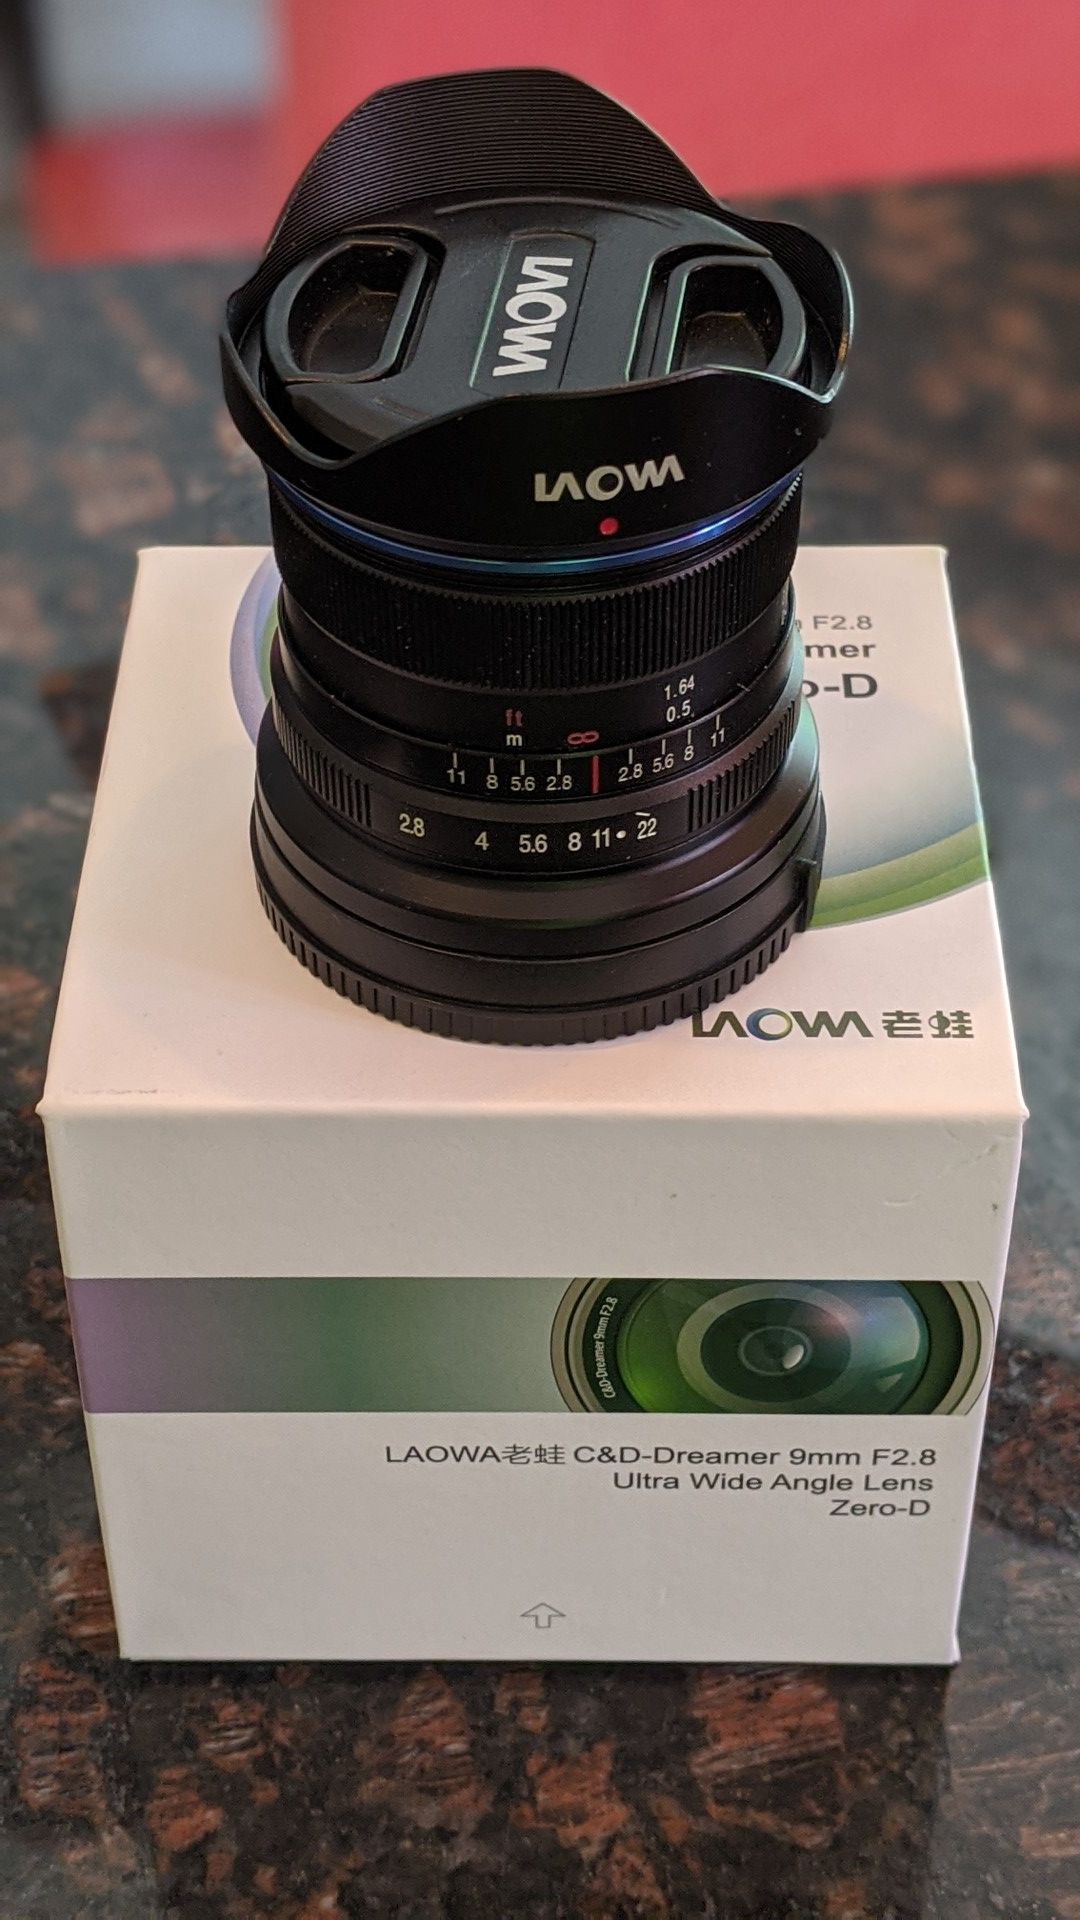 Laowa 9mm 2.8 ultra wide lens for Sony e-mount camera